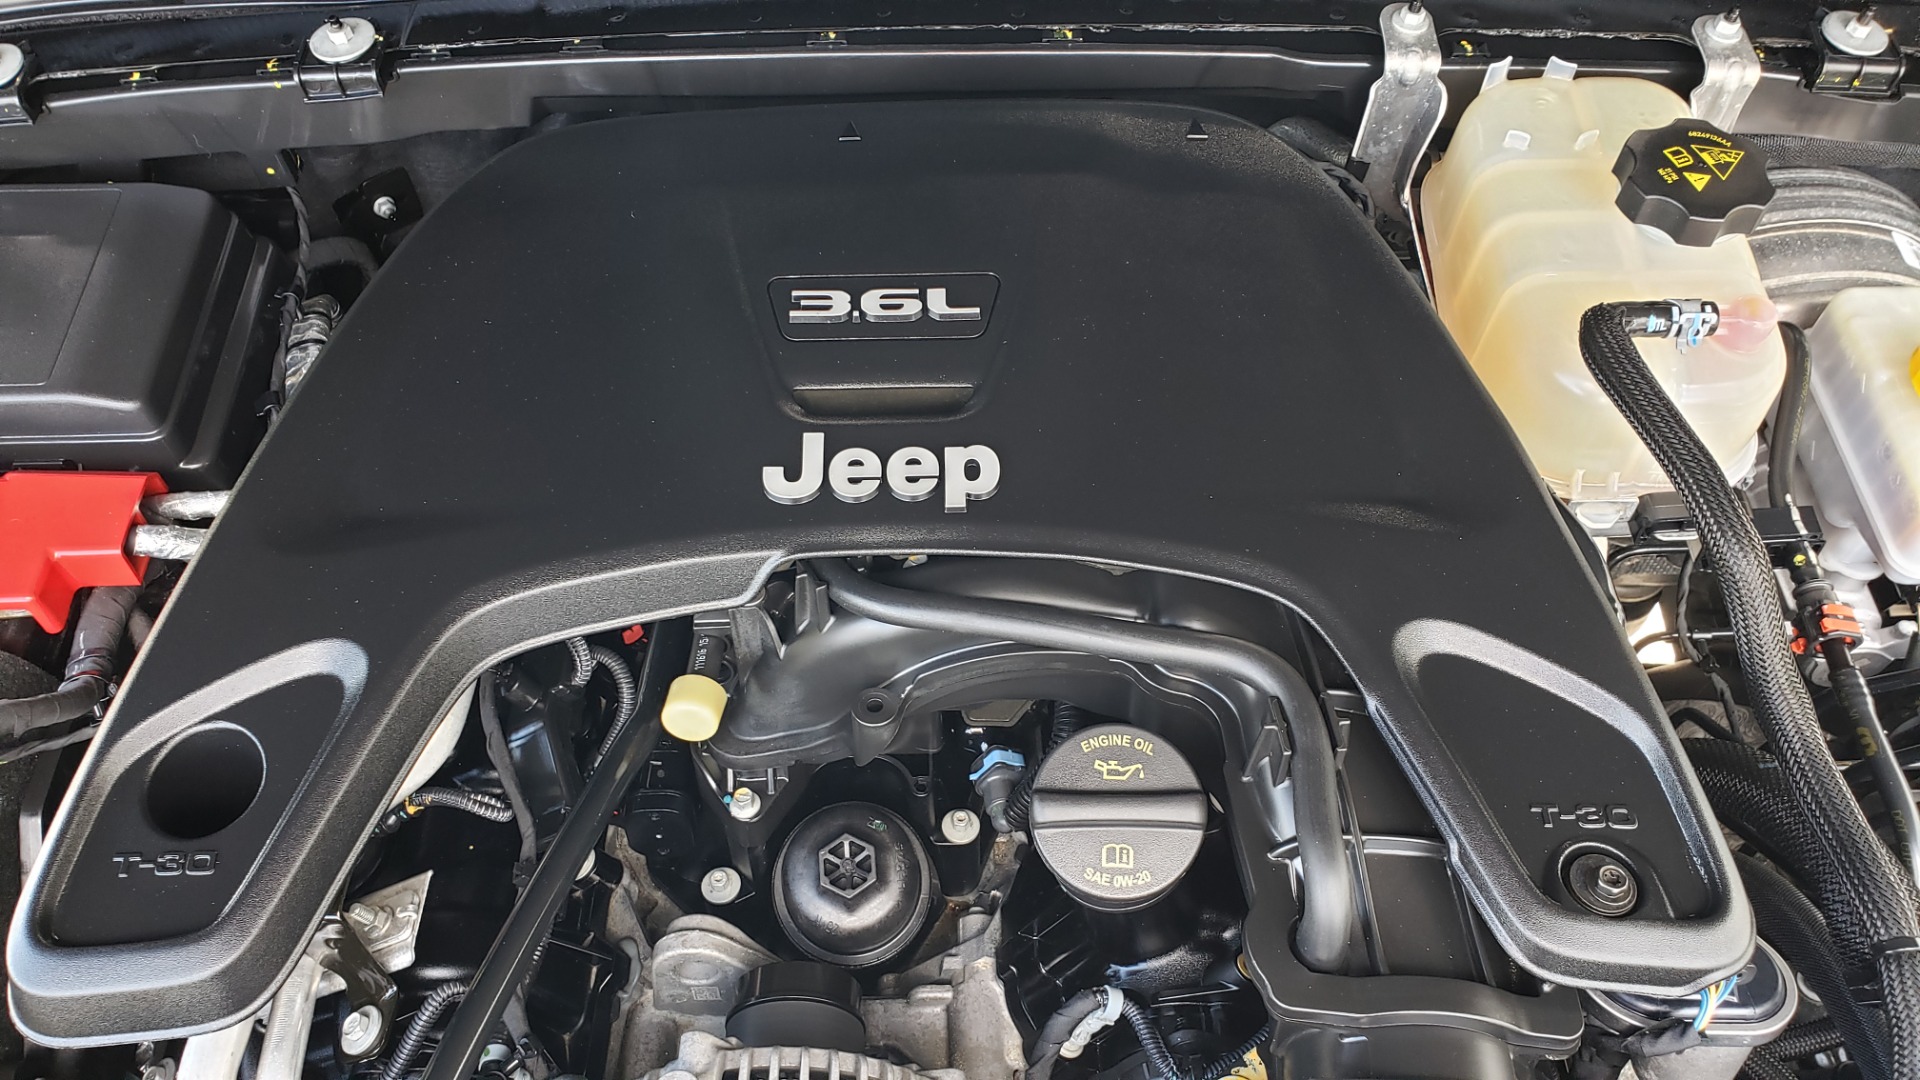 Used 2018 Jeep WRANGLER UNLIMITED SAHARA / 3.6L V6 / 6-SPD MAN / ALPINE / NAV / HTD STS / REARVIEW for sale Sold at Formula Imports in Charlotte NC 28227 17